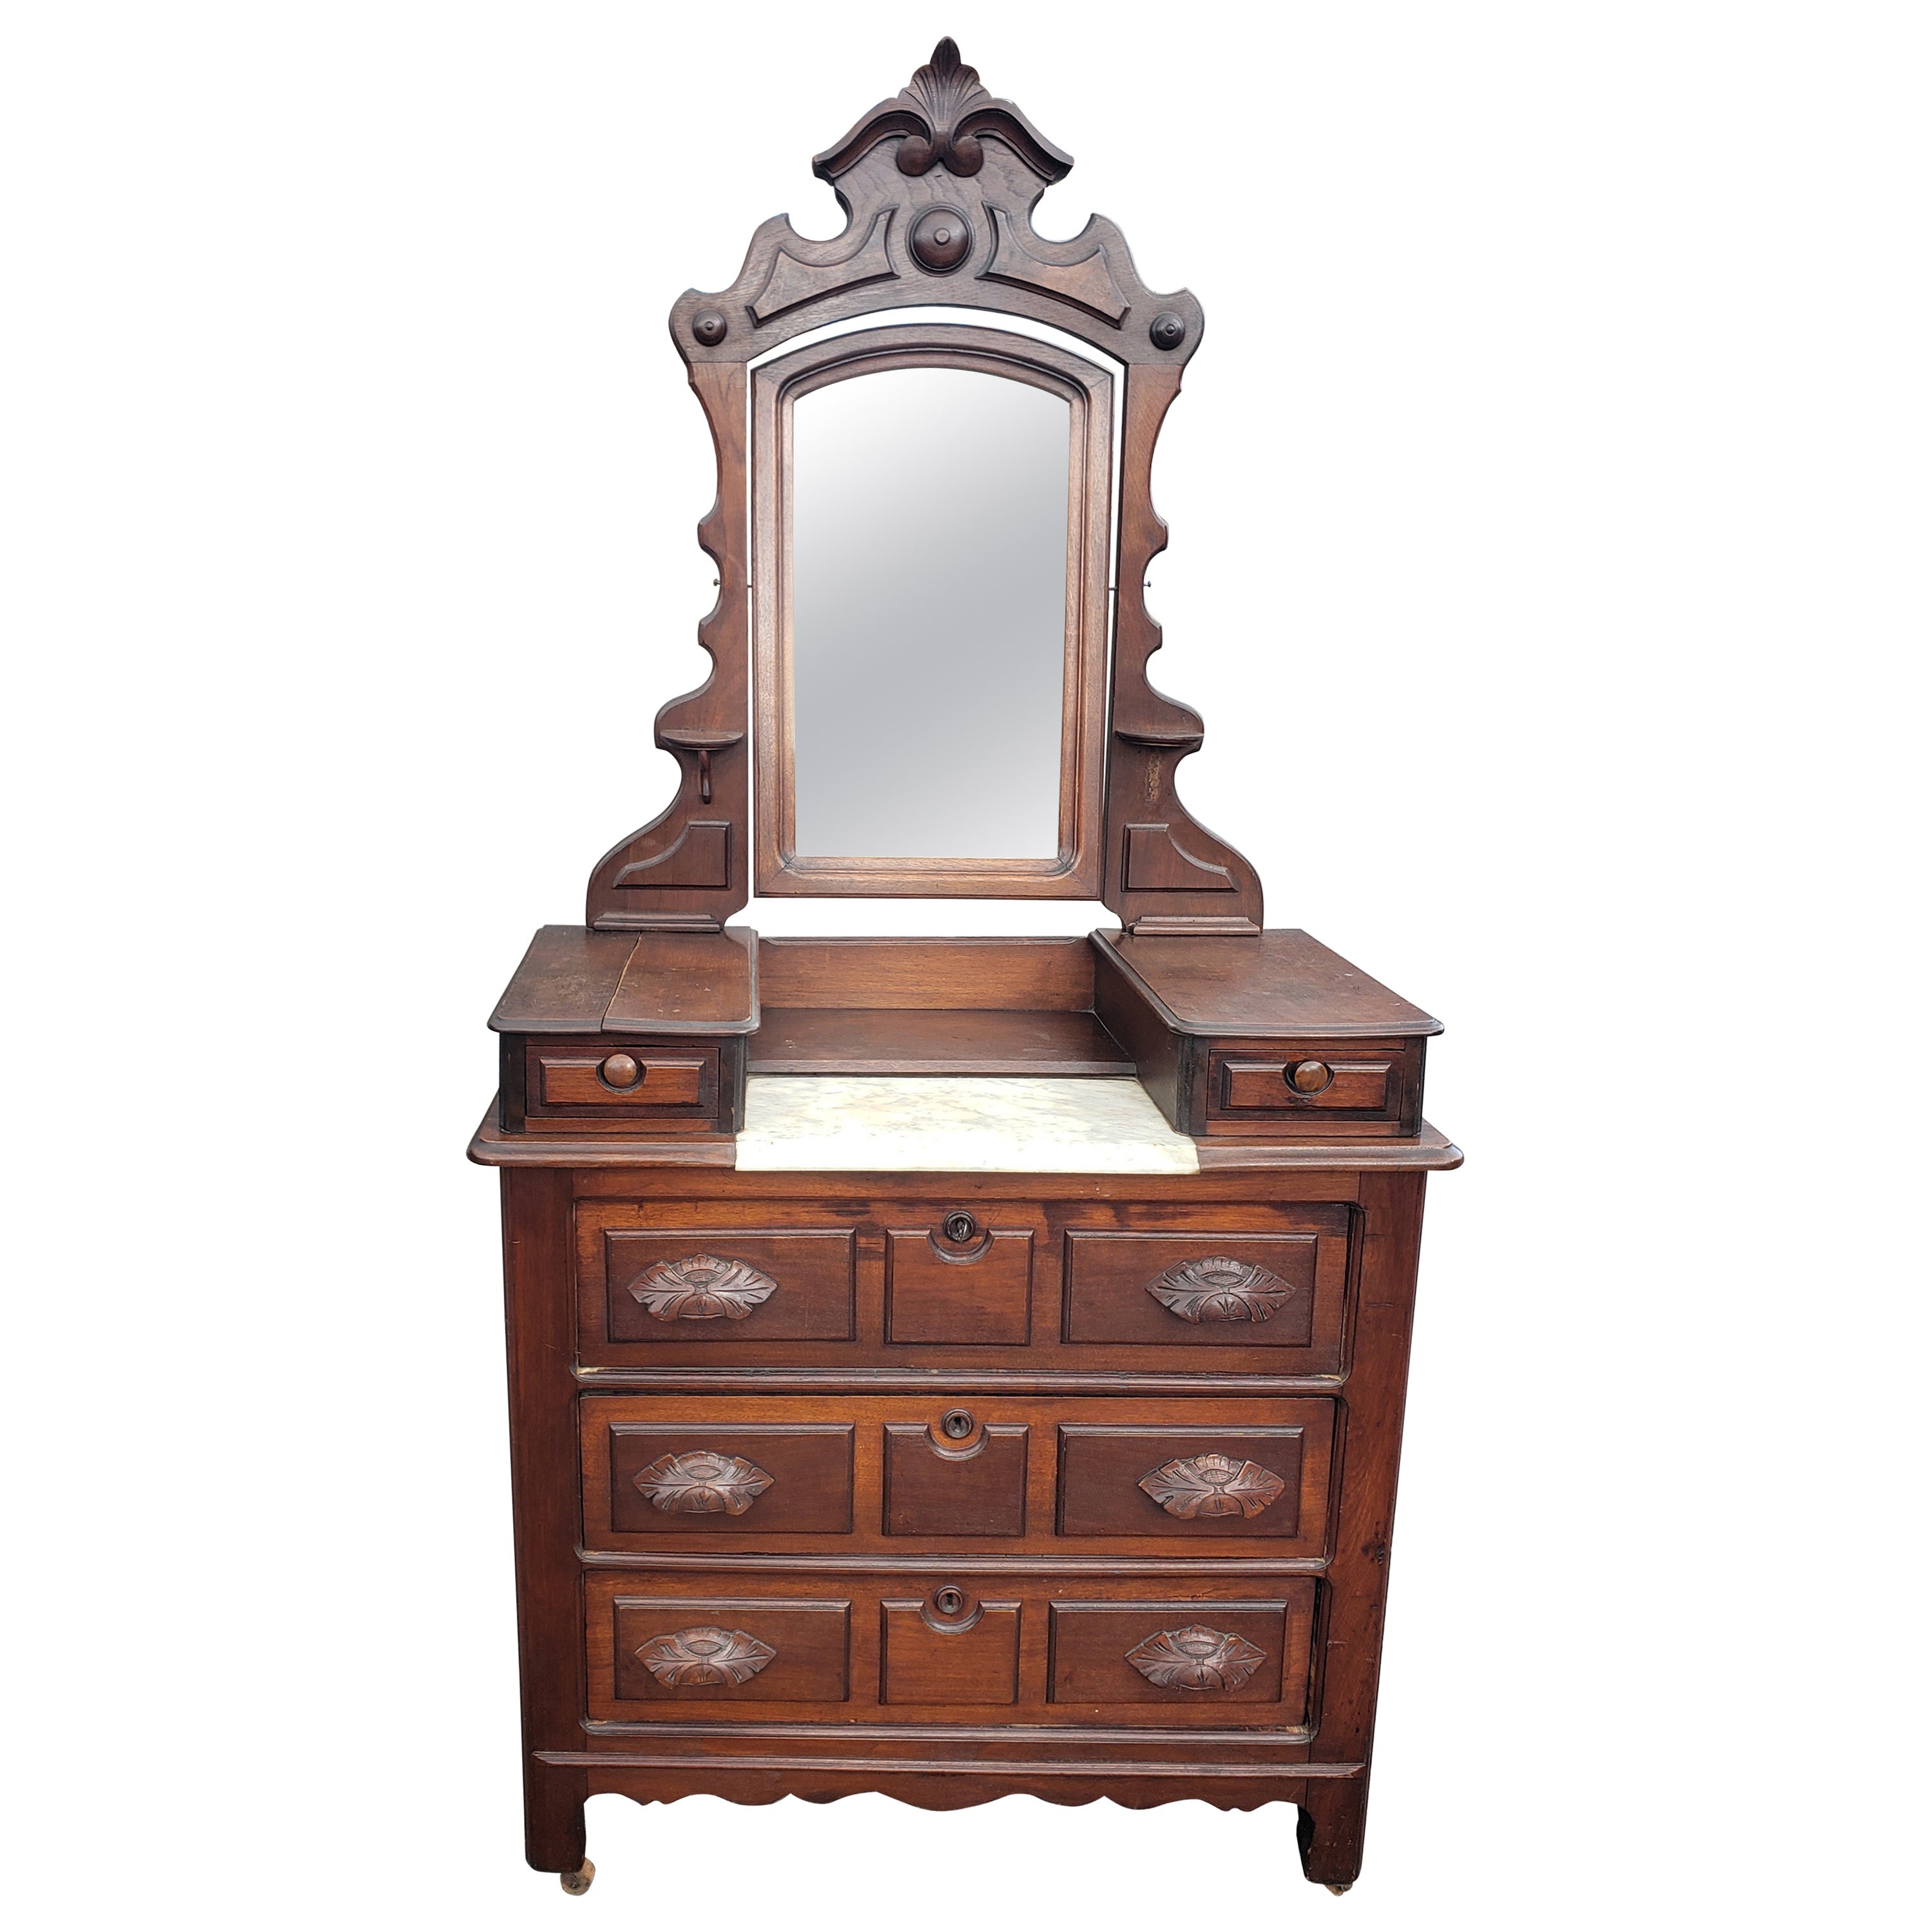 19th C. American Empire Eastlake Mahogany Dresser w/ Marble Top Inset and Mirror